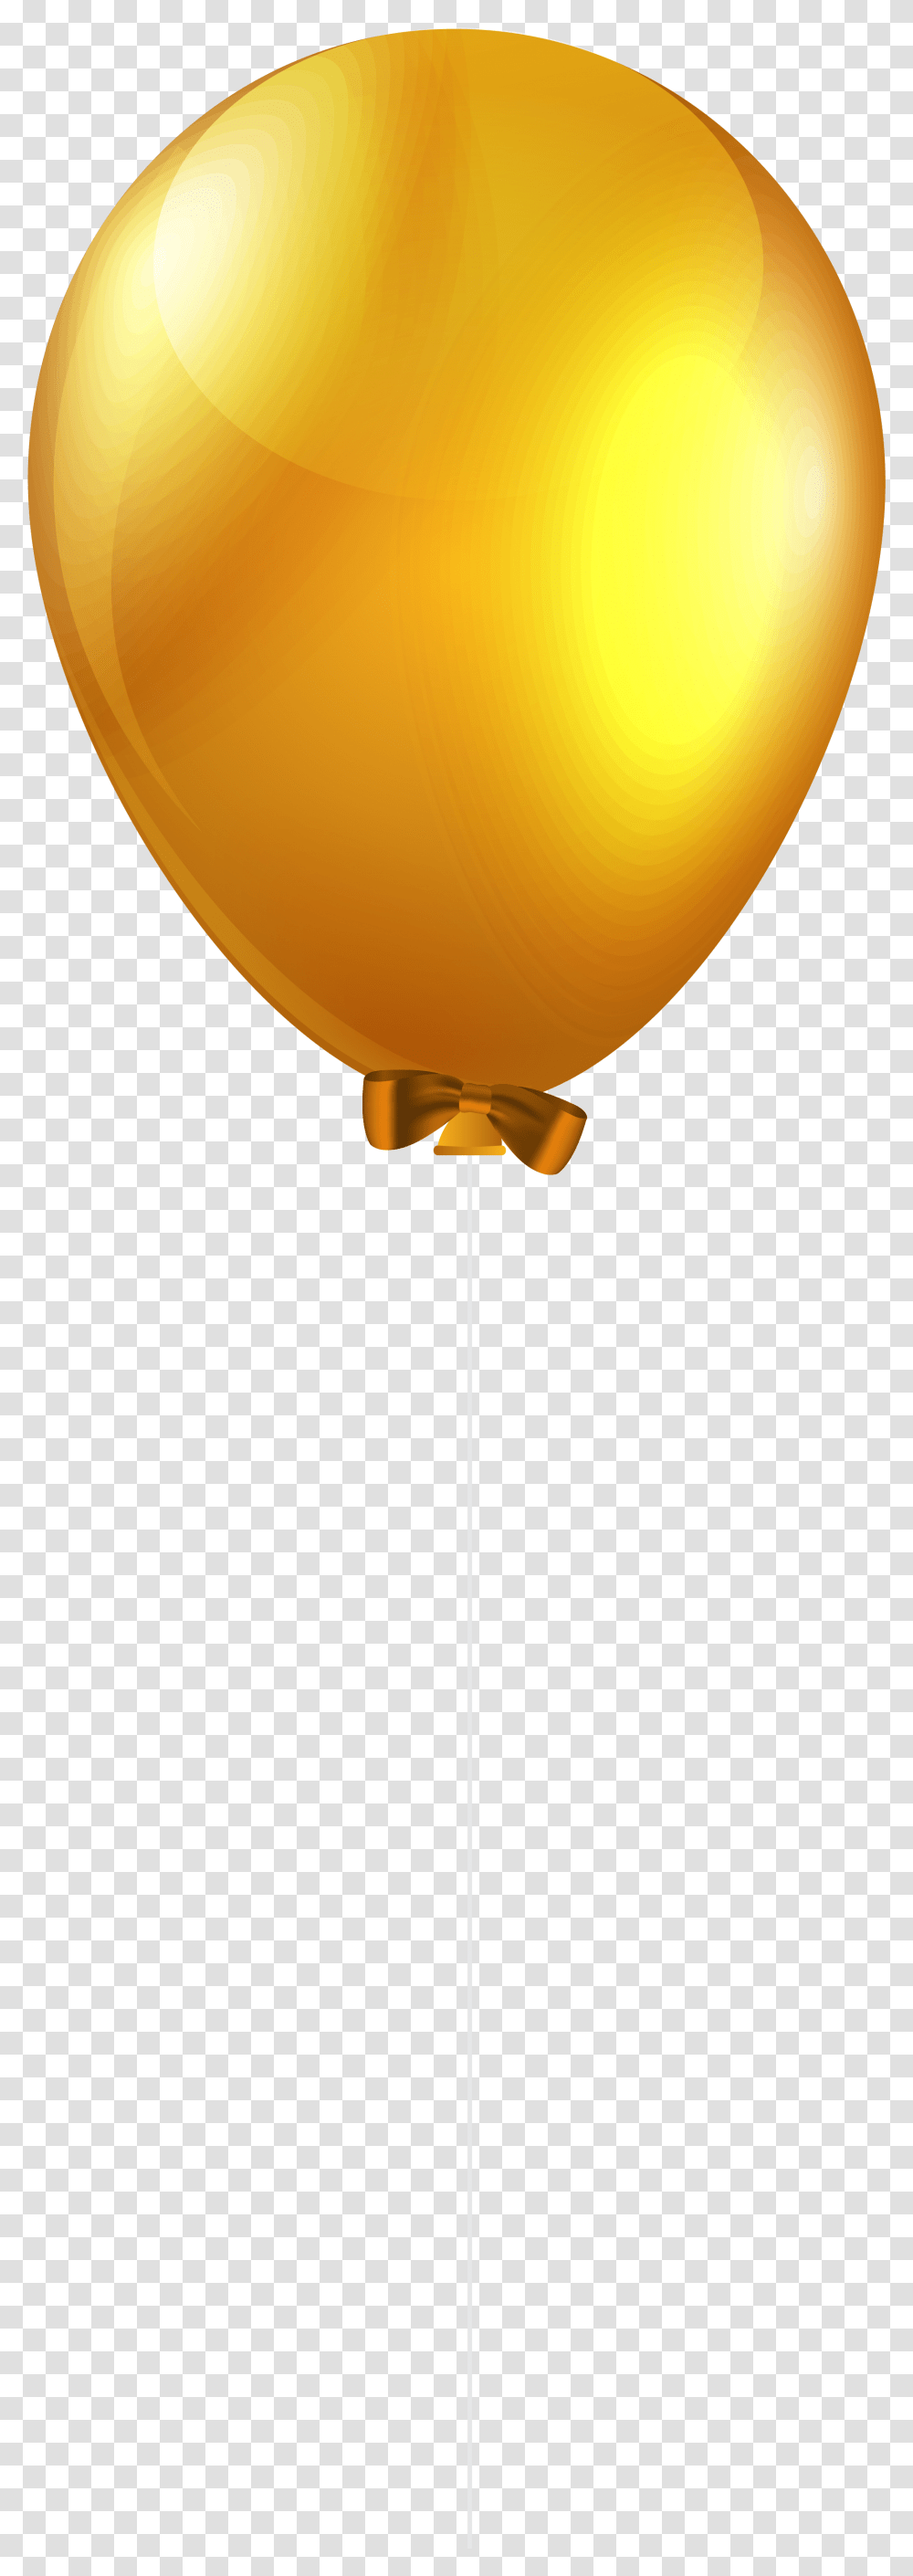 Golden Balloons Picture Gold Balloon Transparent Png